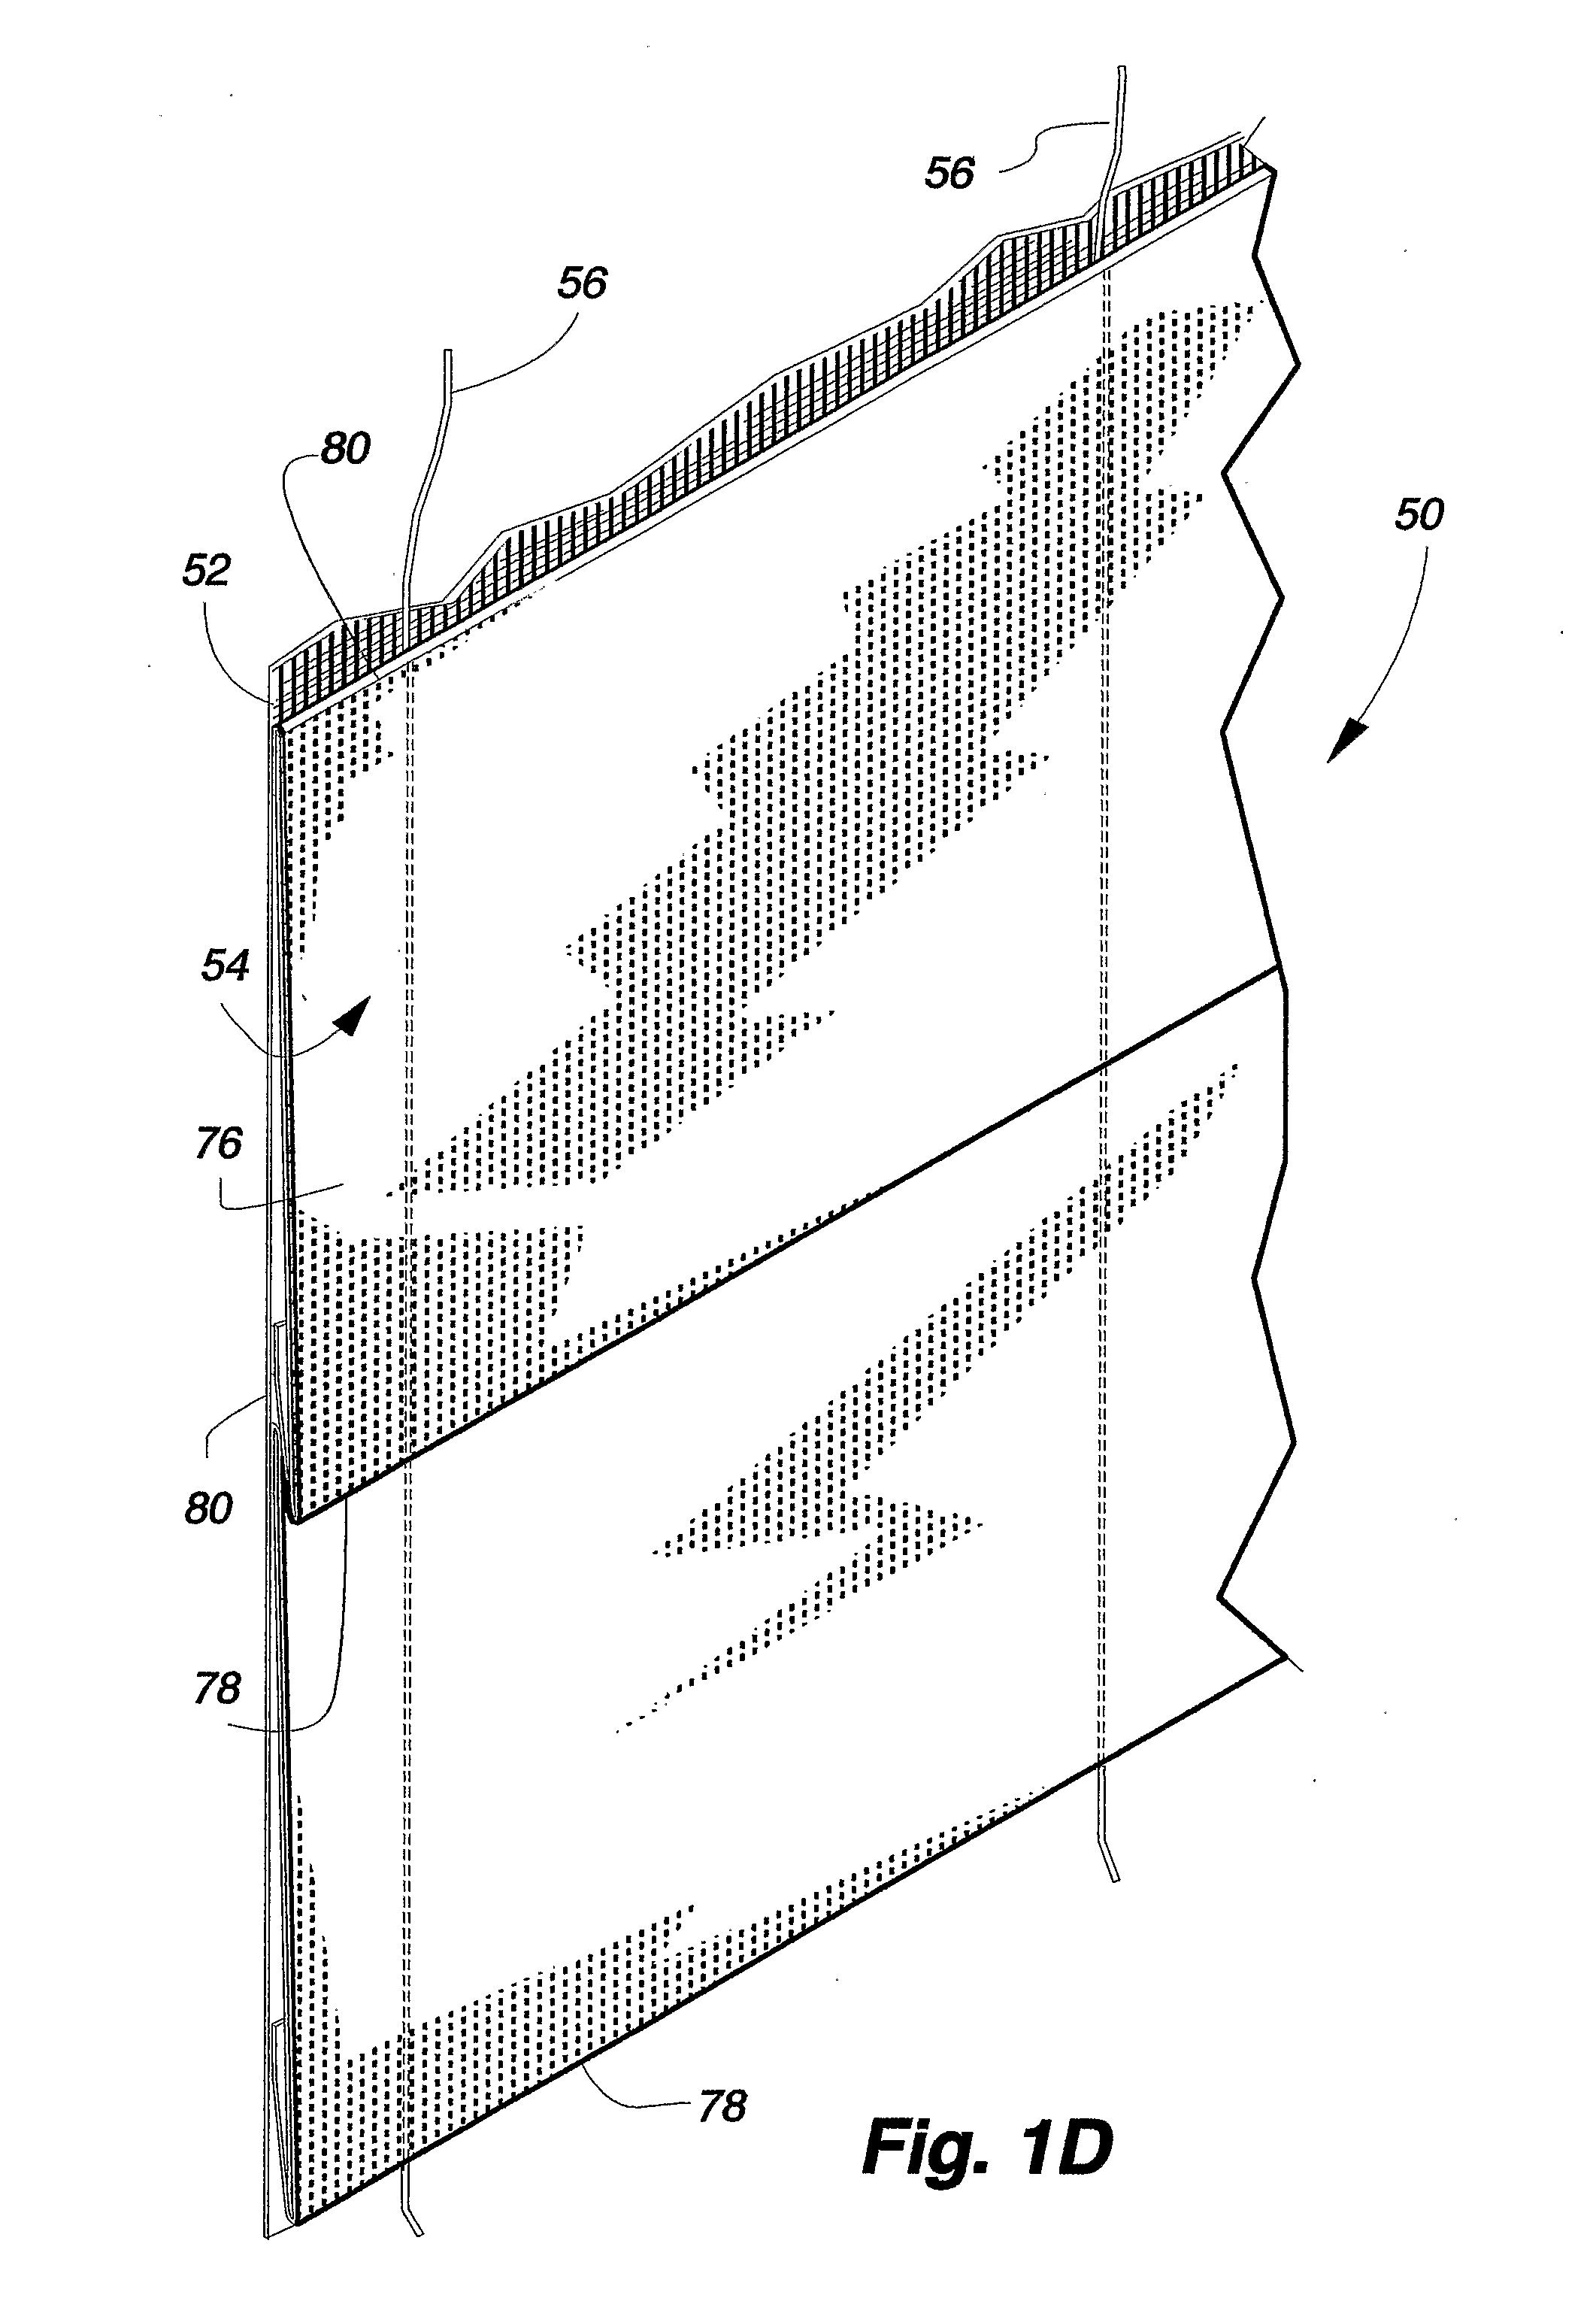 Appparatus and Method for Making a Window Covering Having Operable Vanes